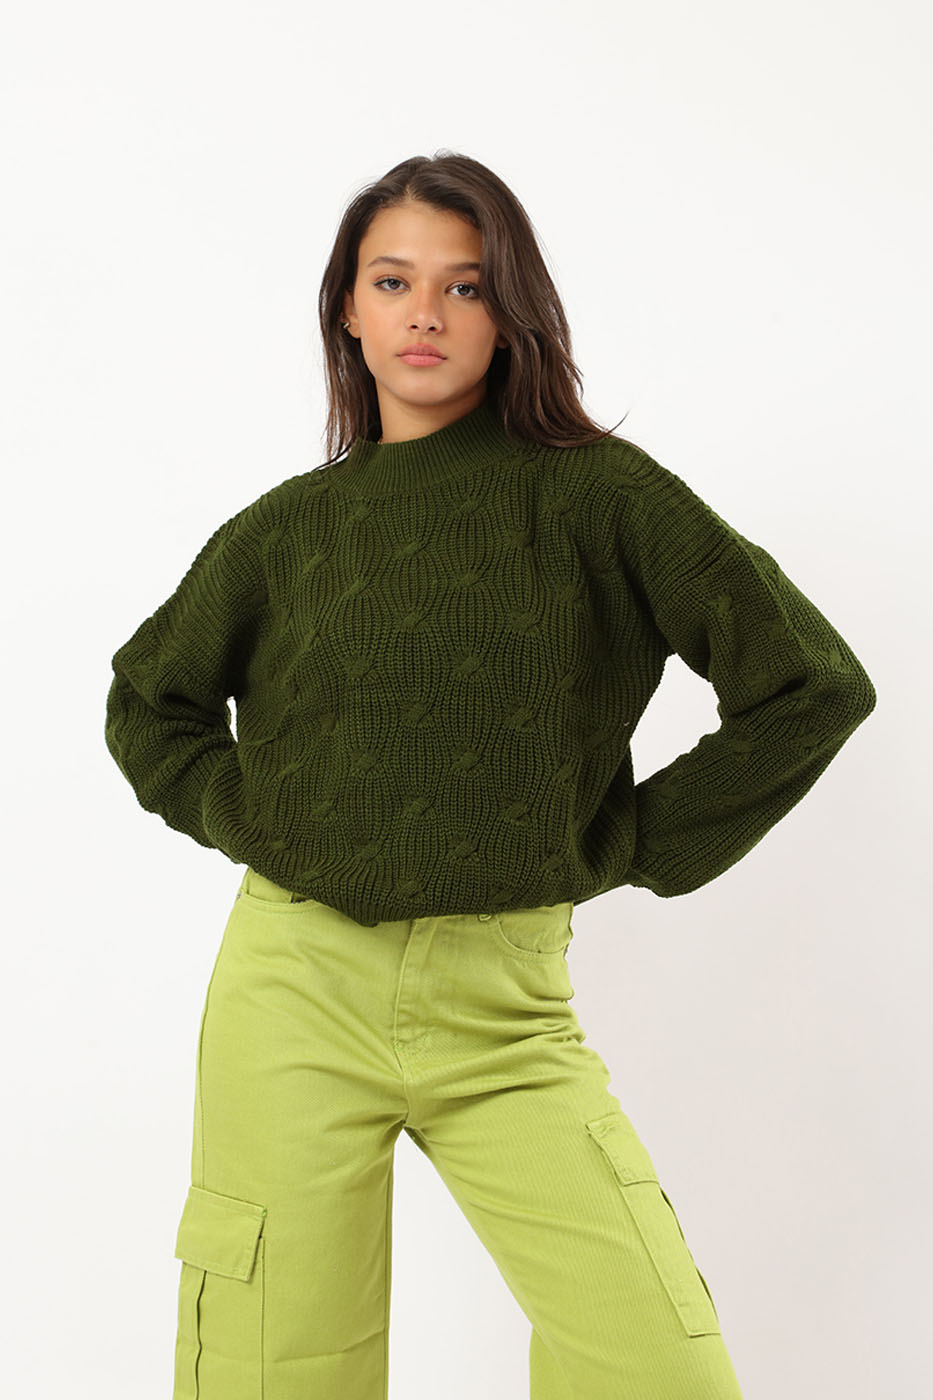 Crewneck Sweater In Olive Green – FYI thumbnail